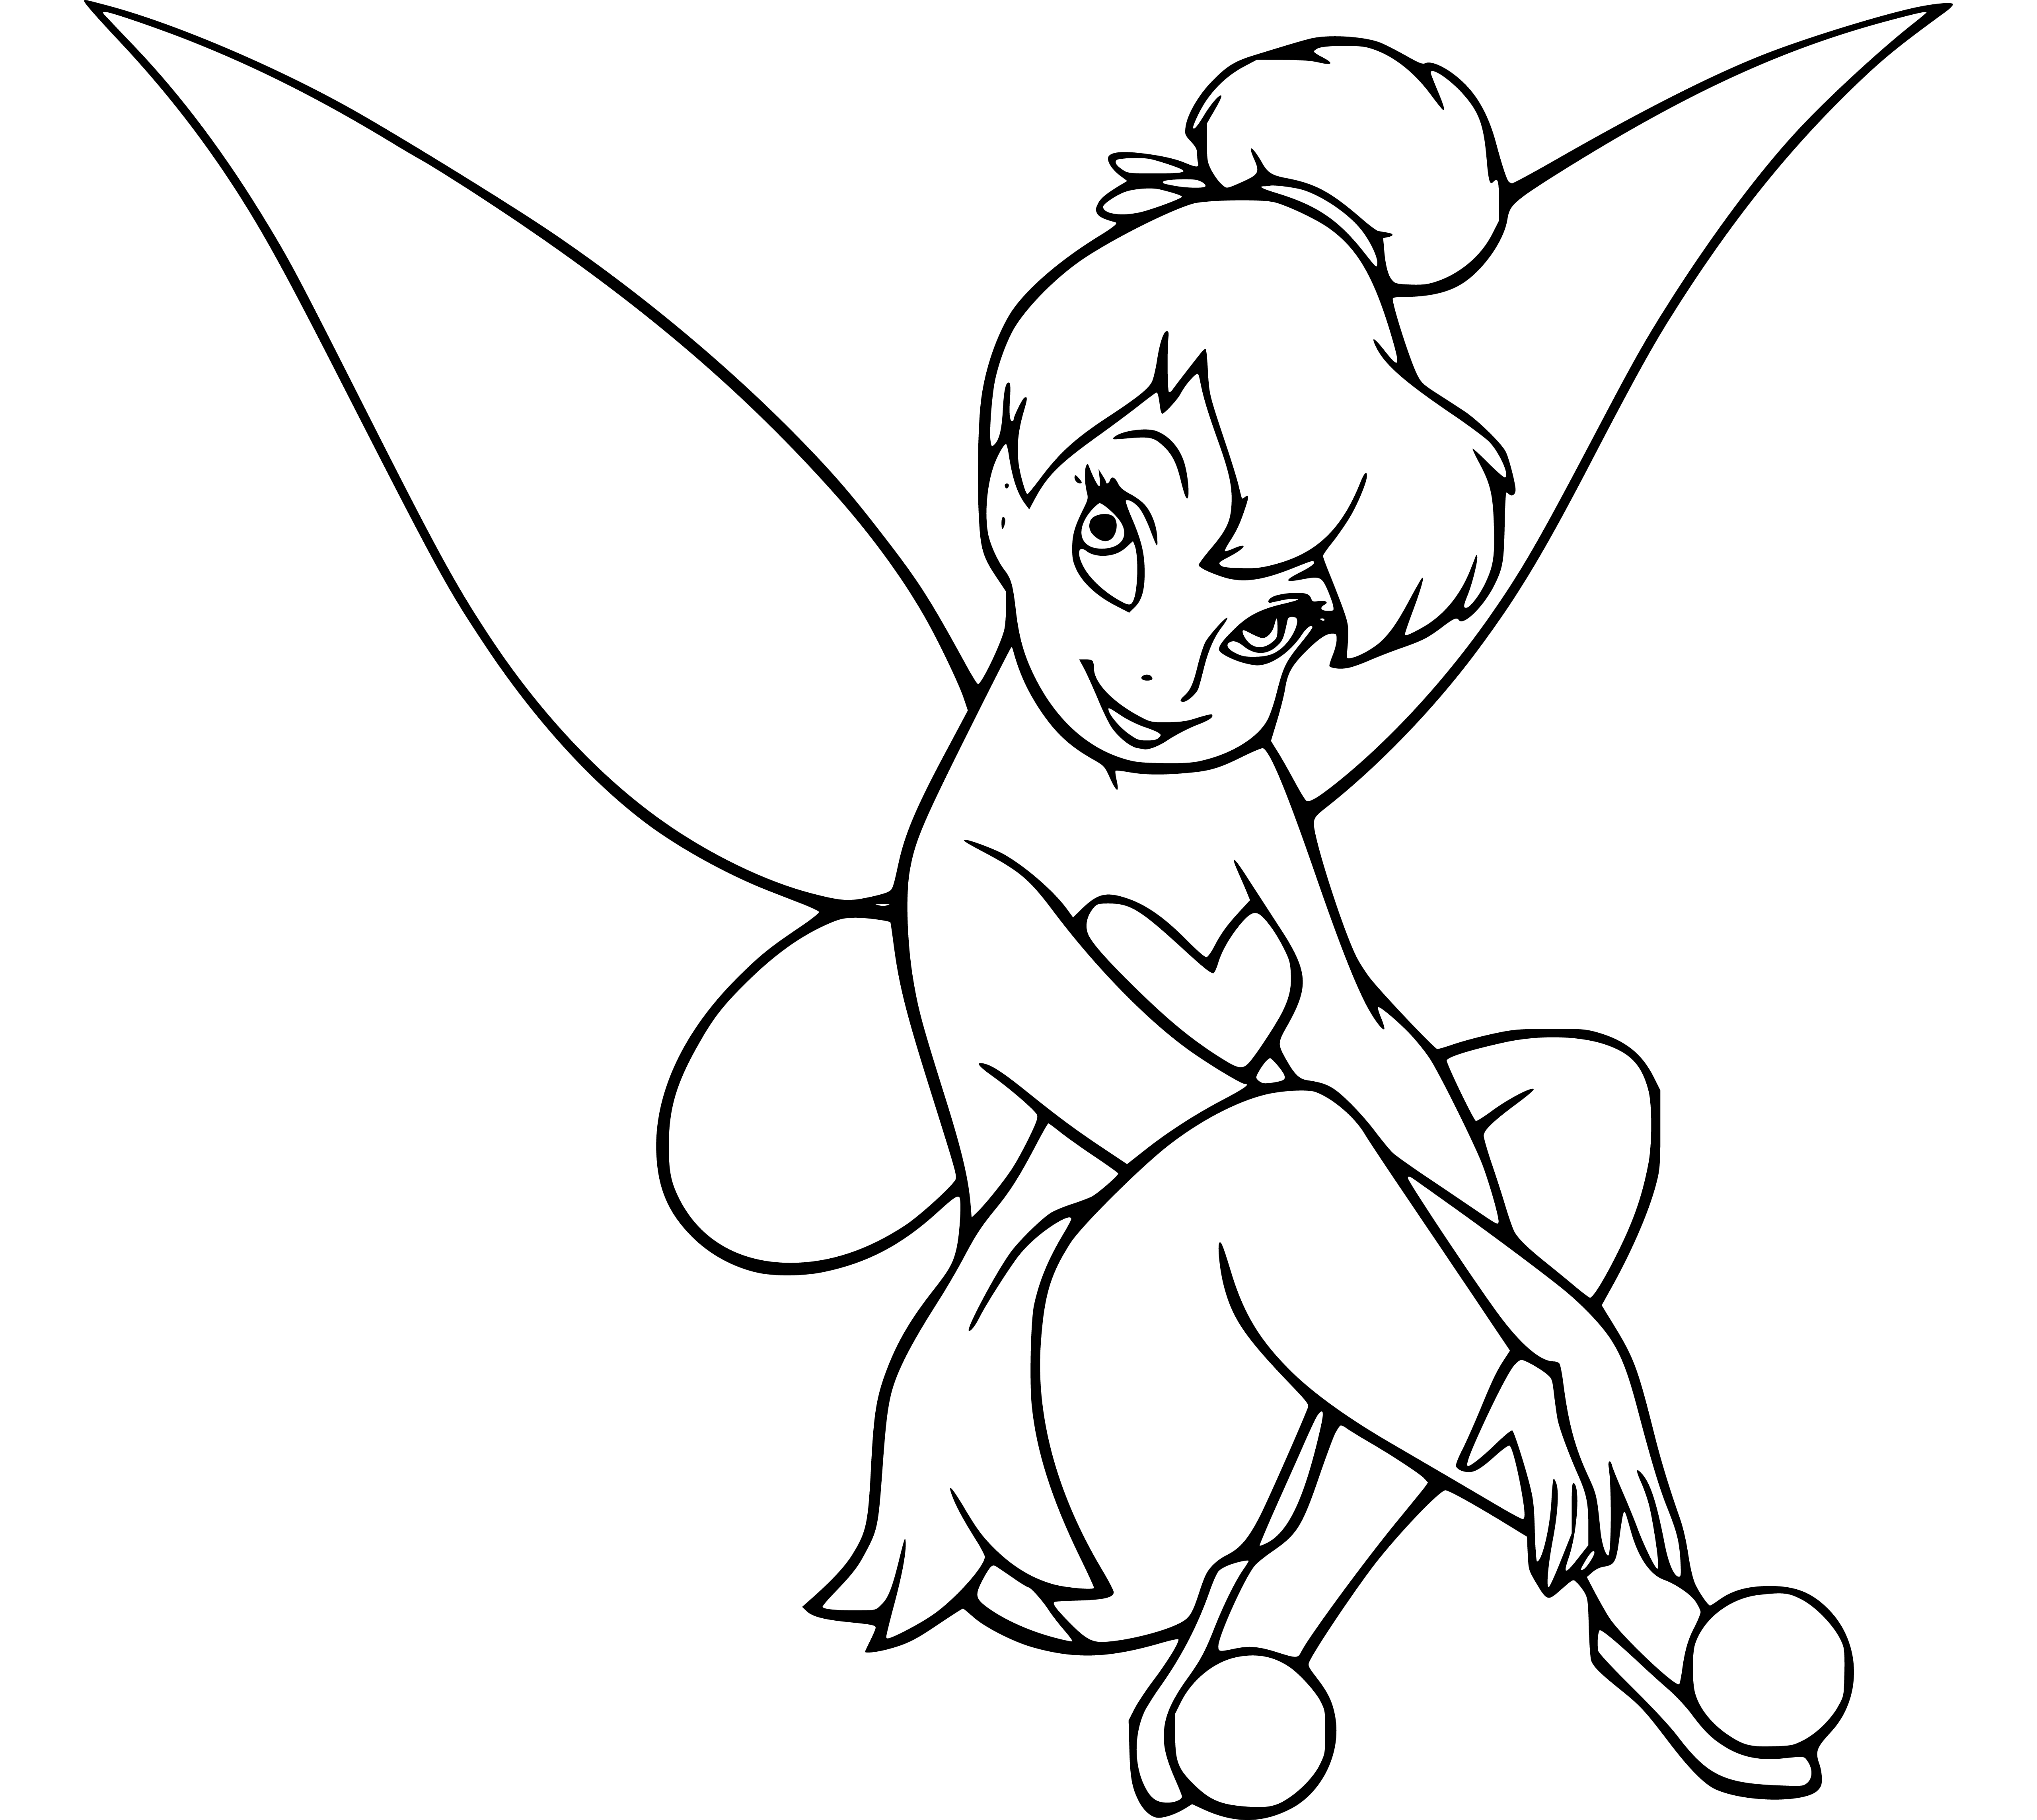 Cute Tinker Bell Coloring Page - SheetalColor.com